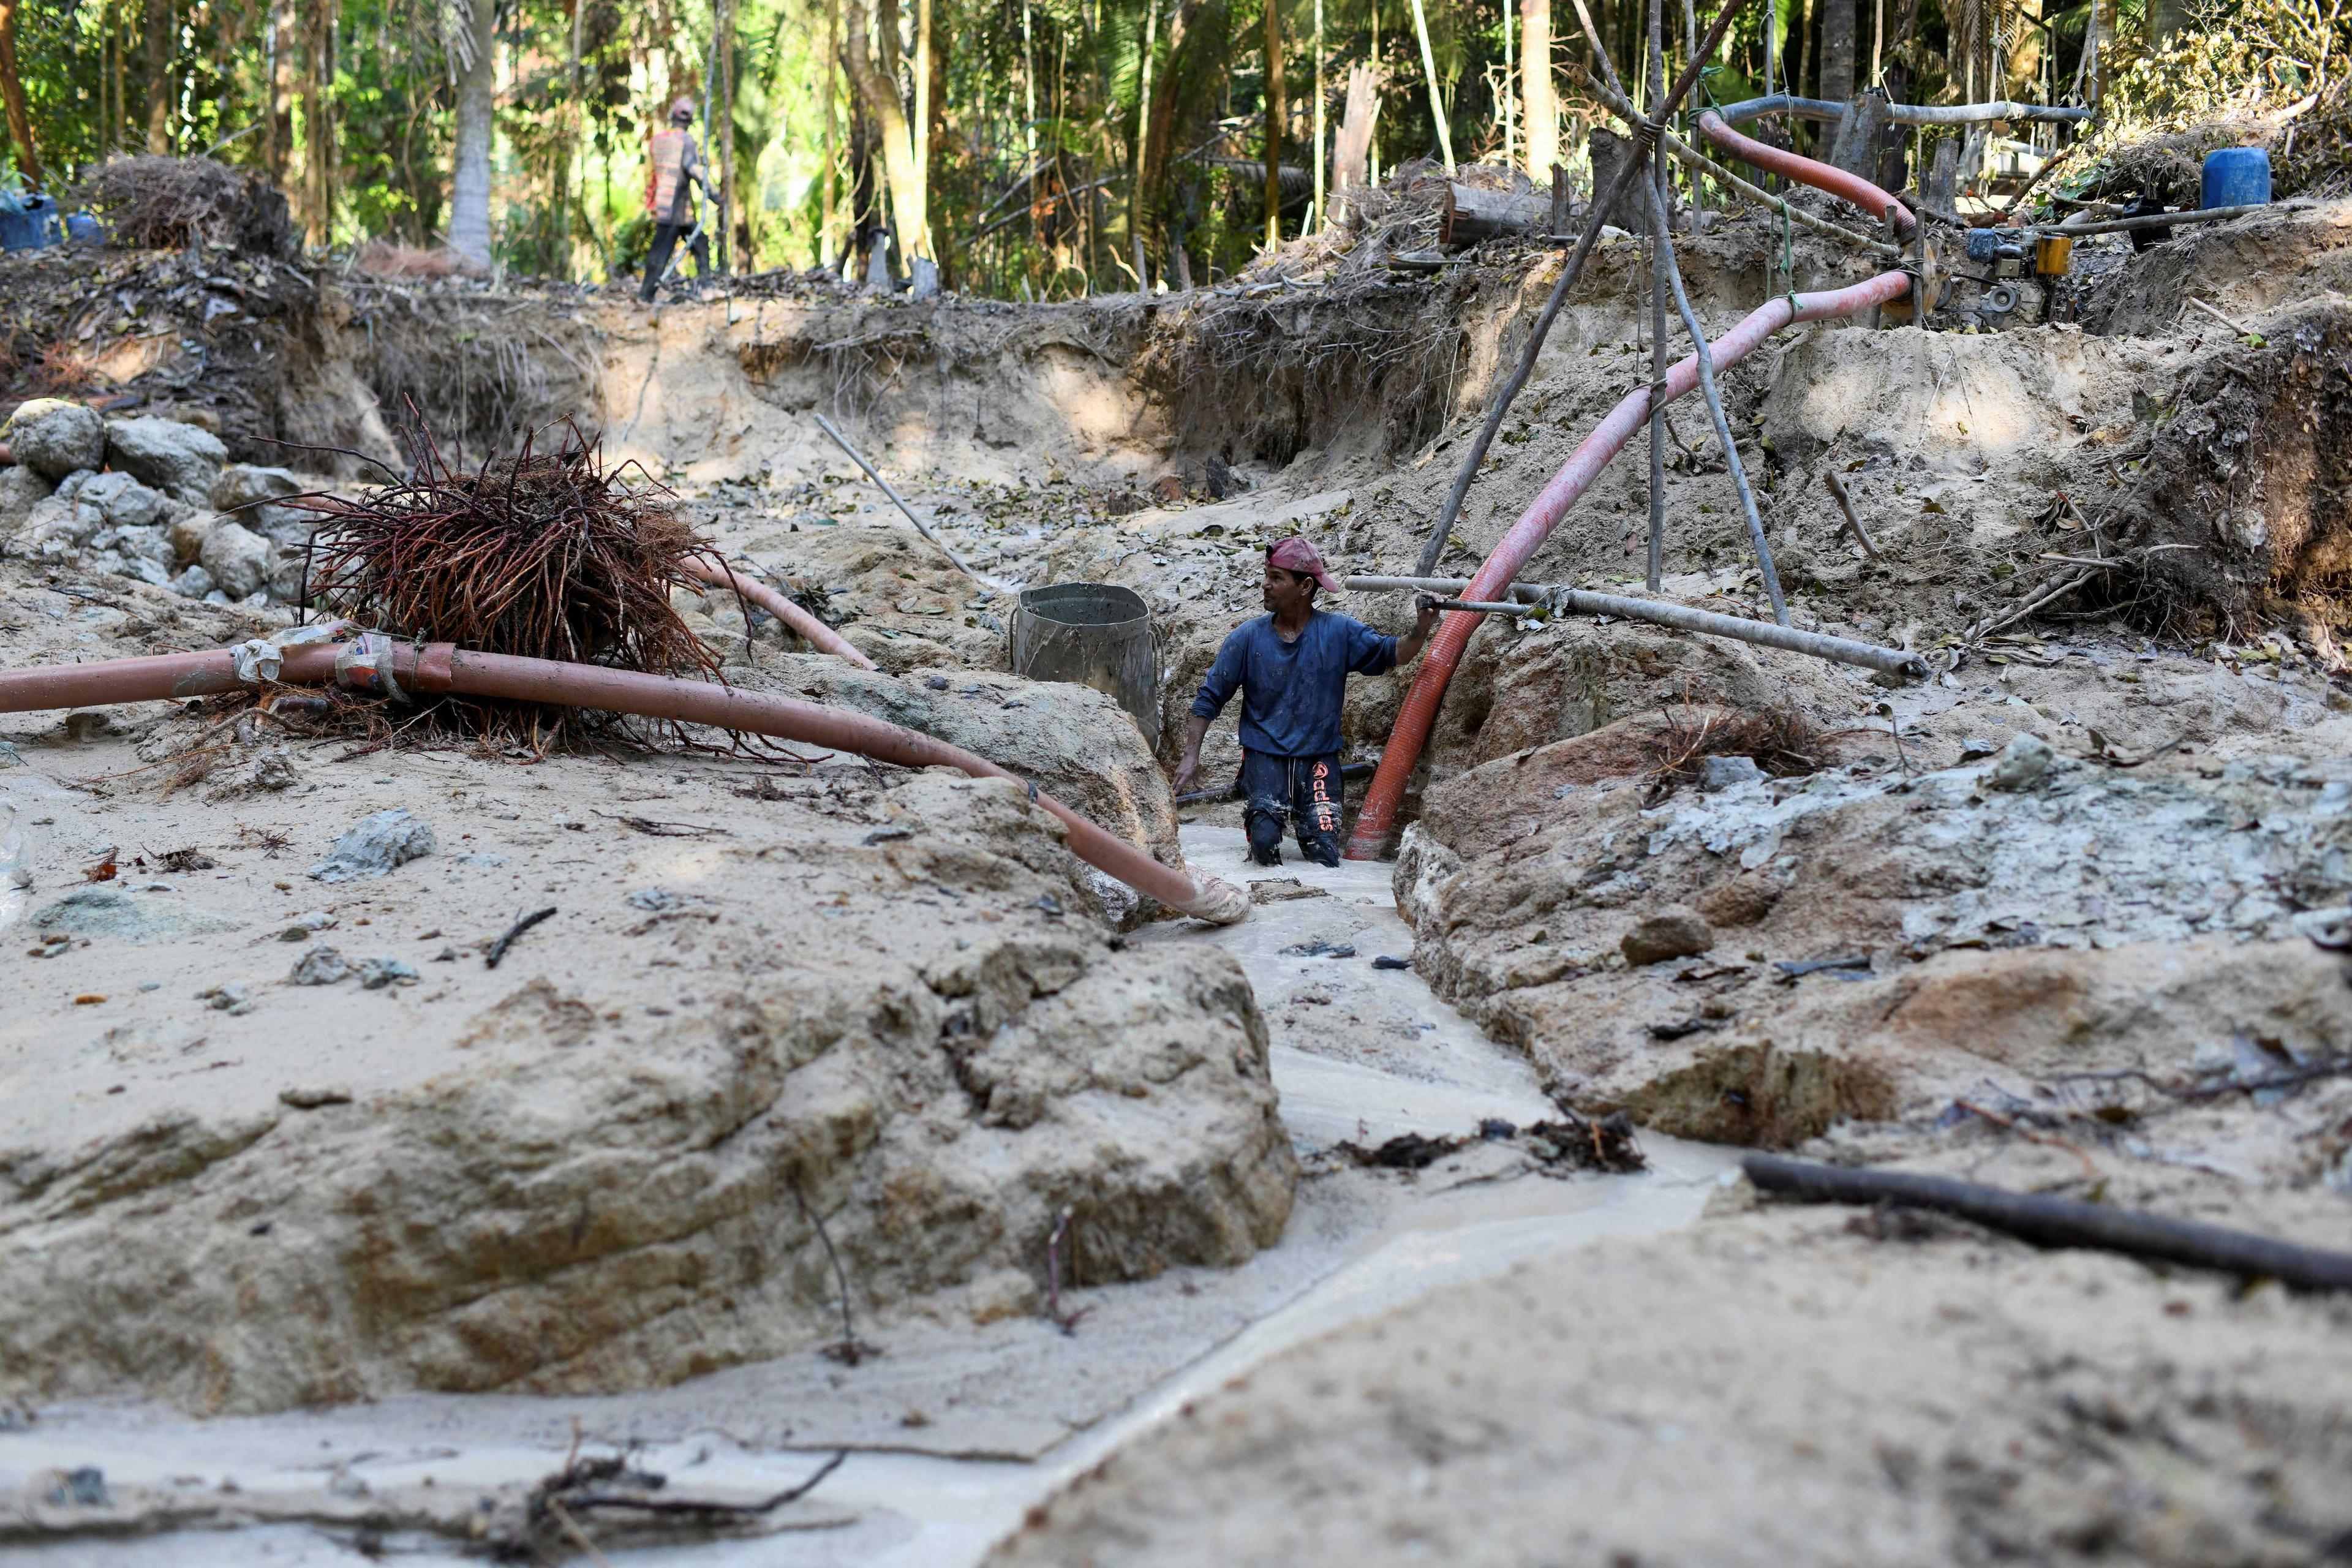 A miner works in an illegal gold mine at an environmental preservation area in the Amazon rainforest, in Itaituba, Para state, Brazil Sept 3, 2021. Photo: Reuters